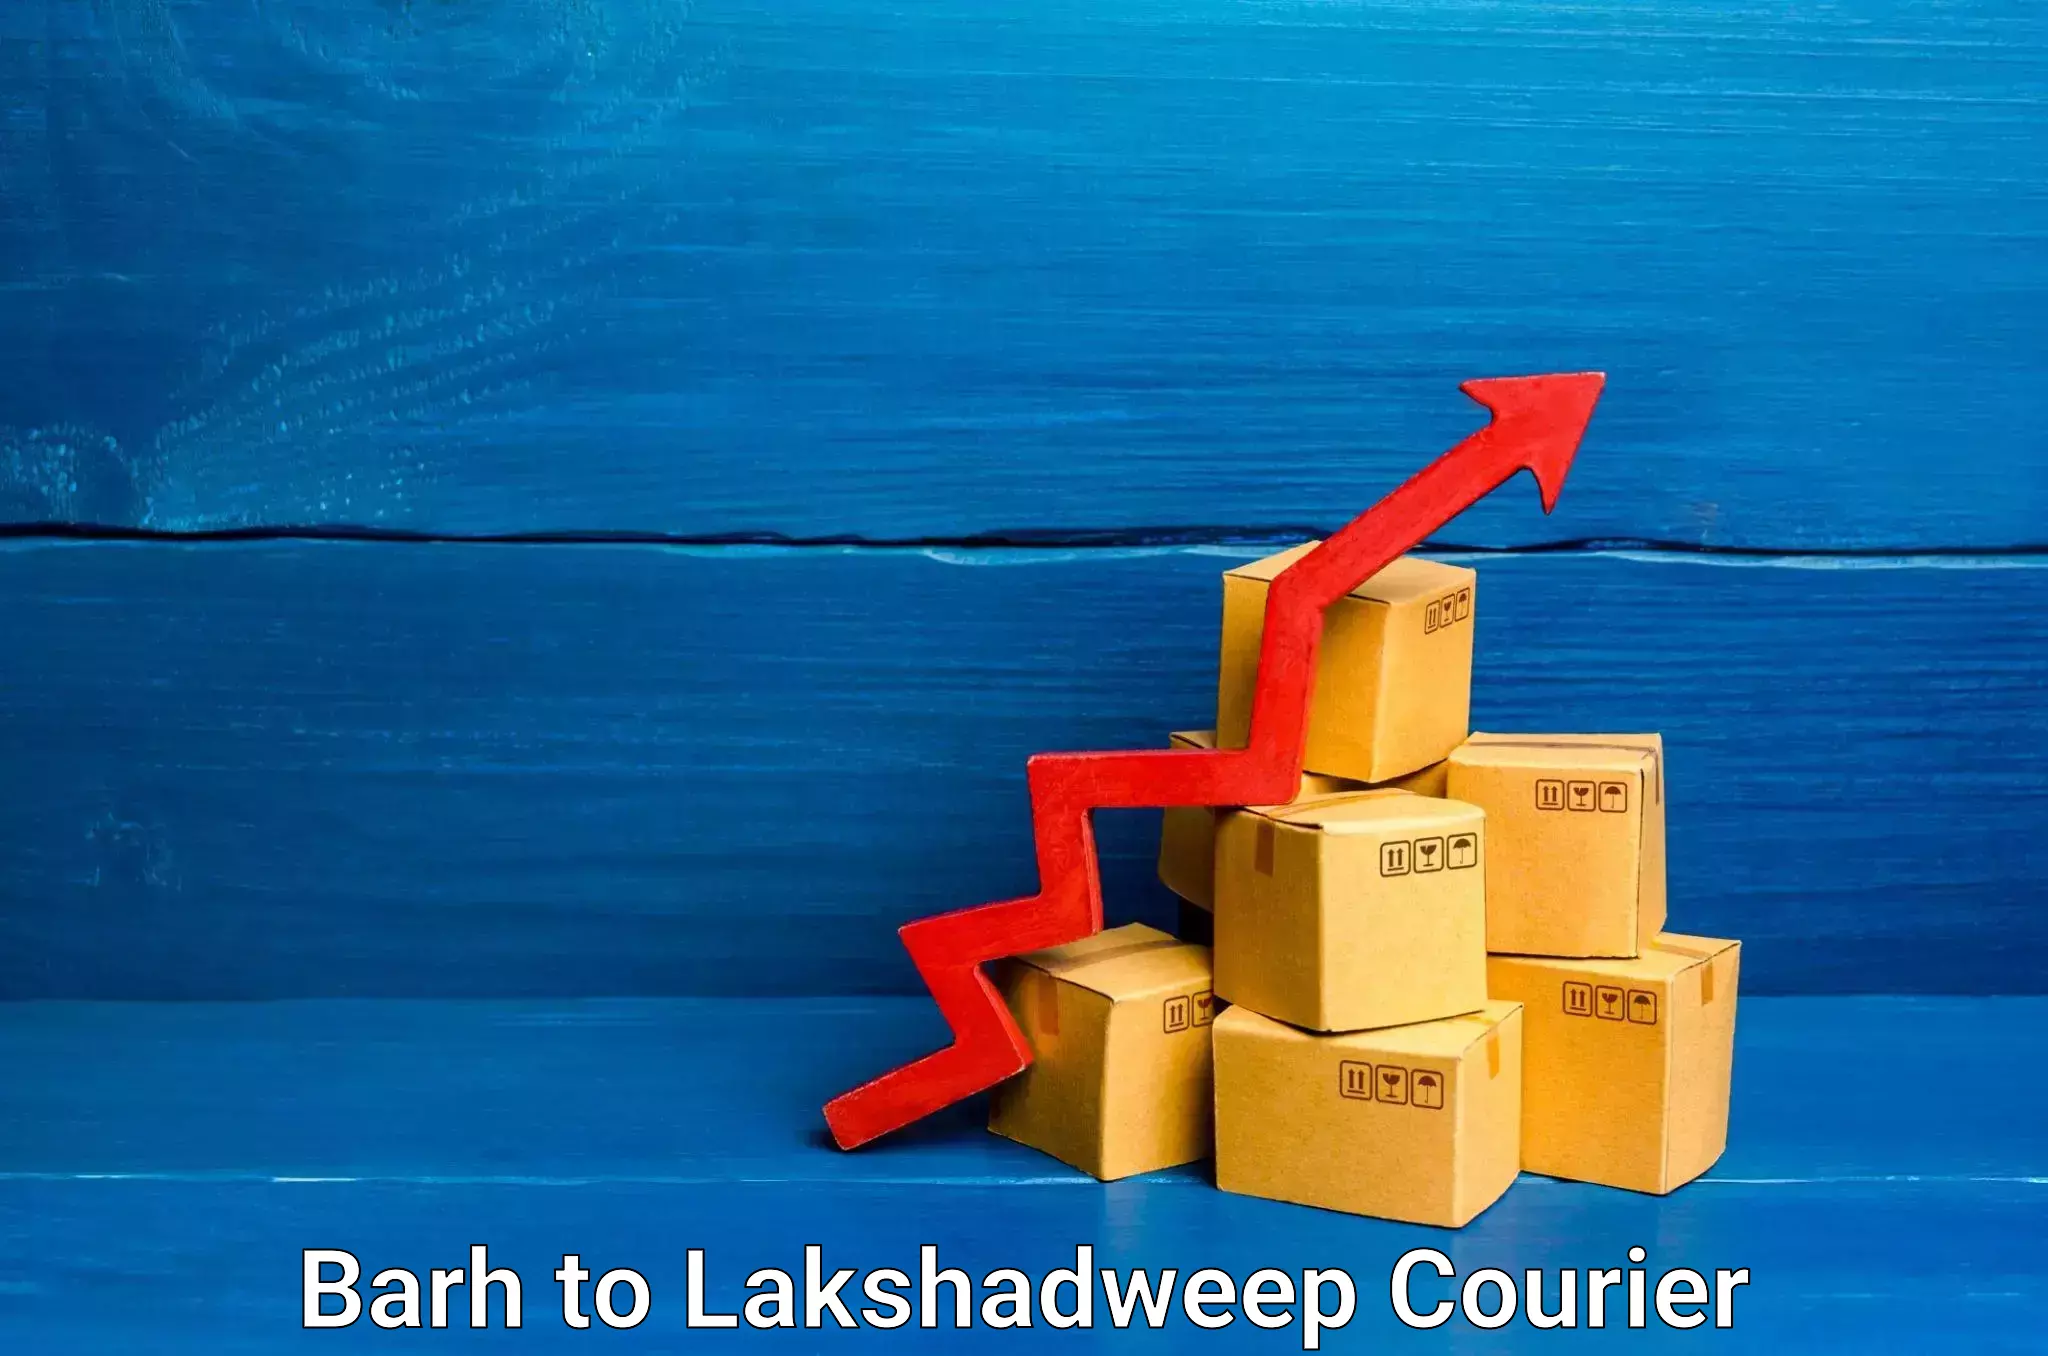 Trusted moving company Barh to Lakshadweep